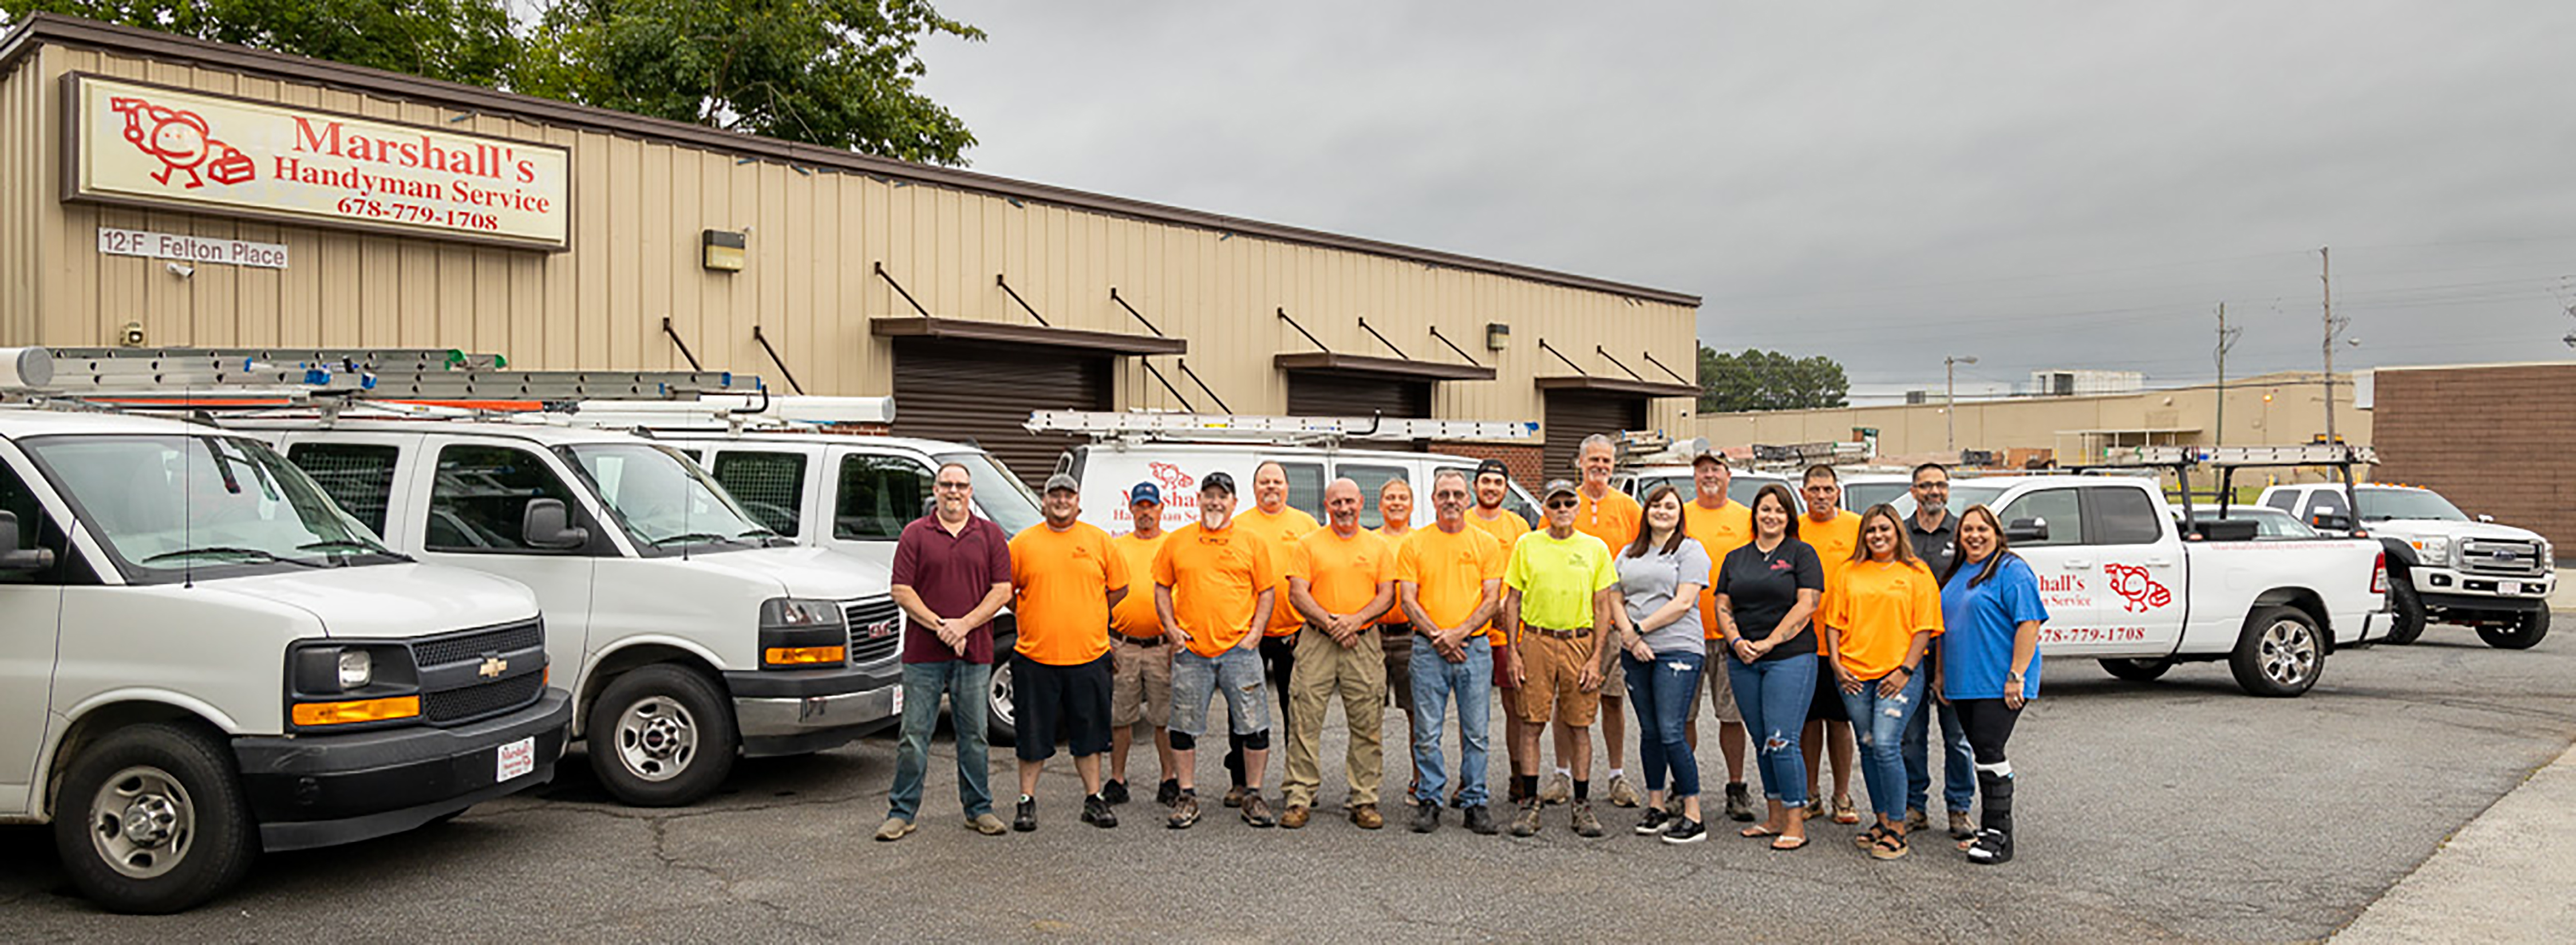 Marshall's Handyman Service team in front of their trucks